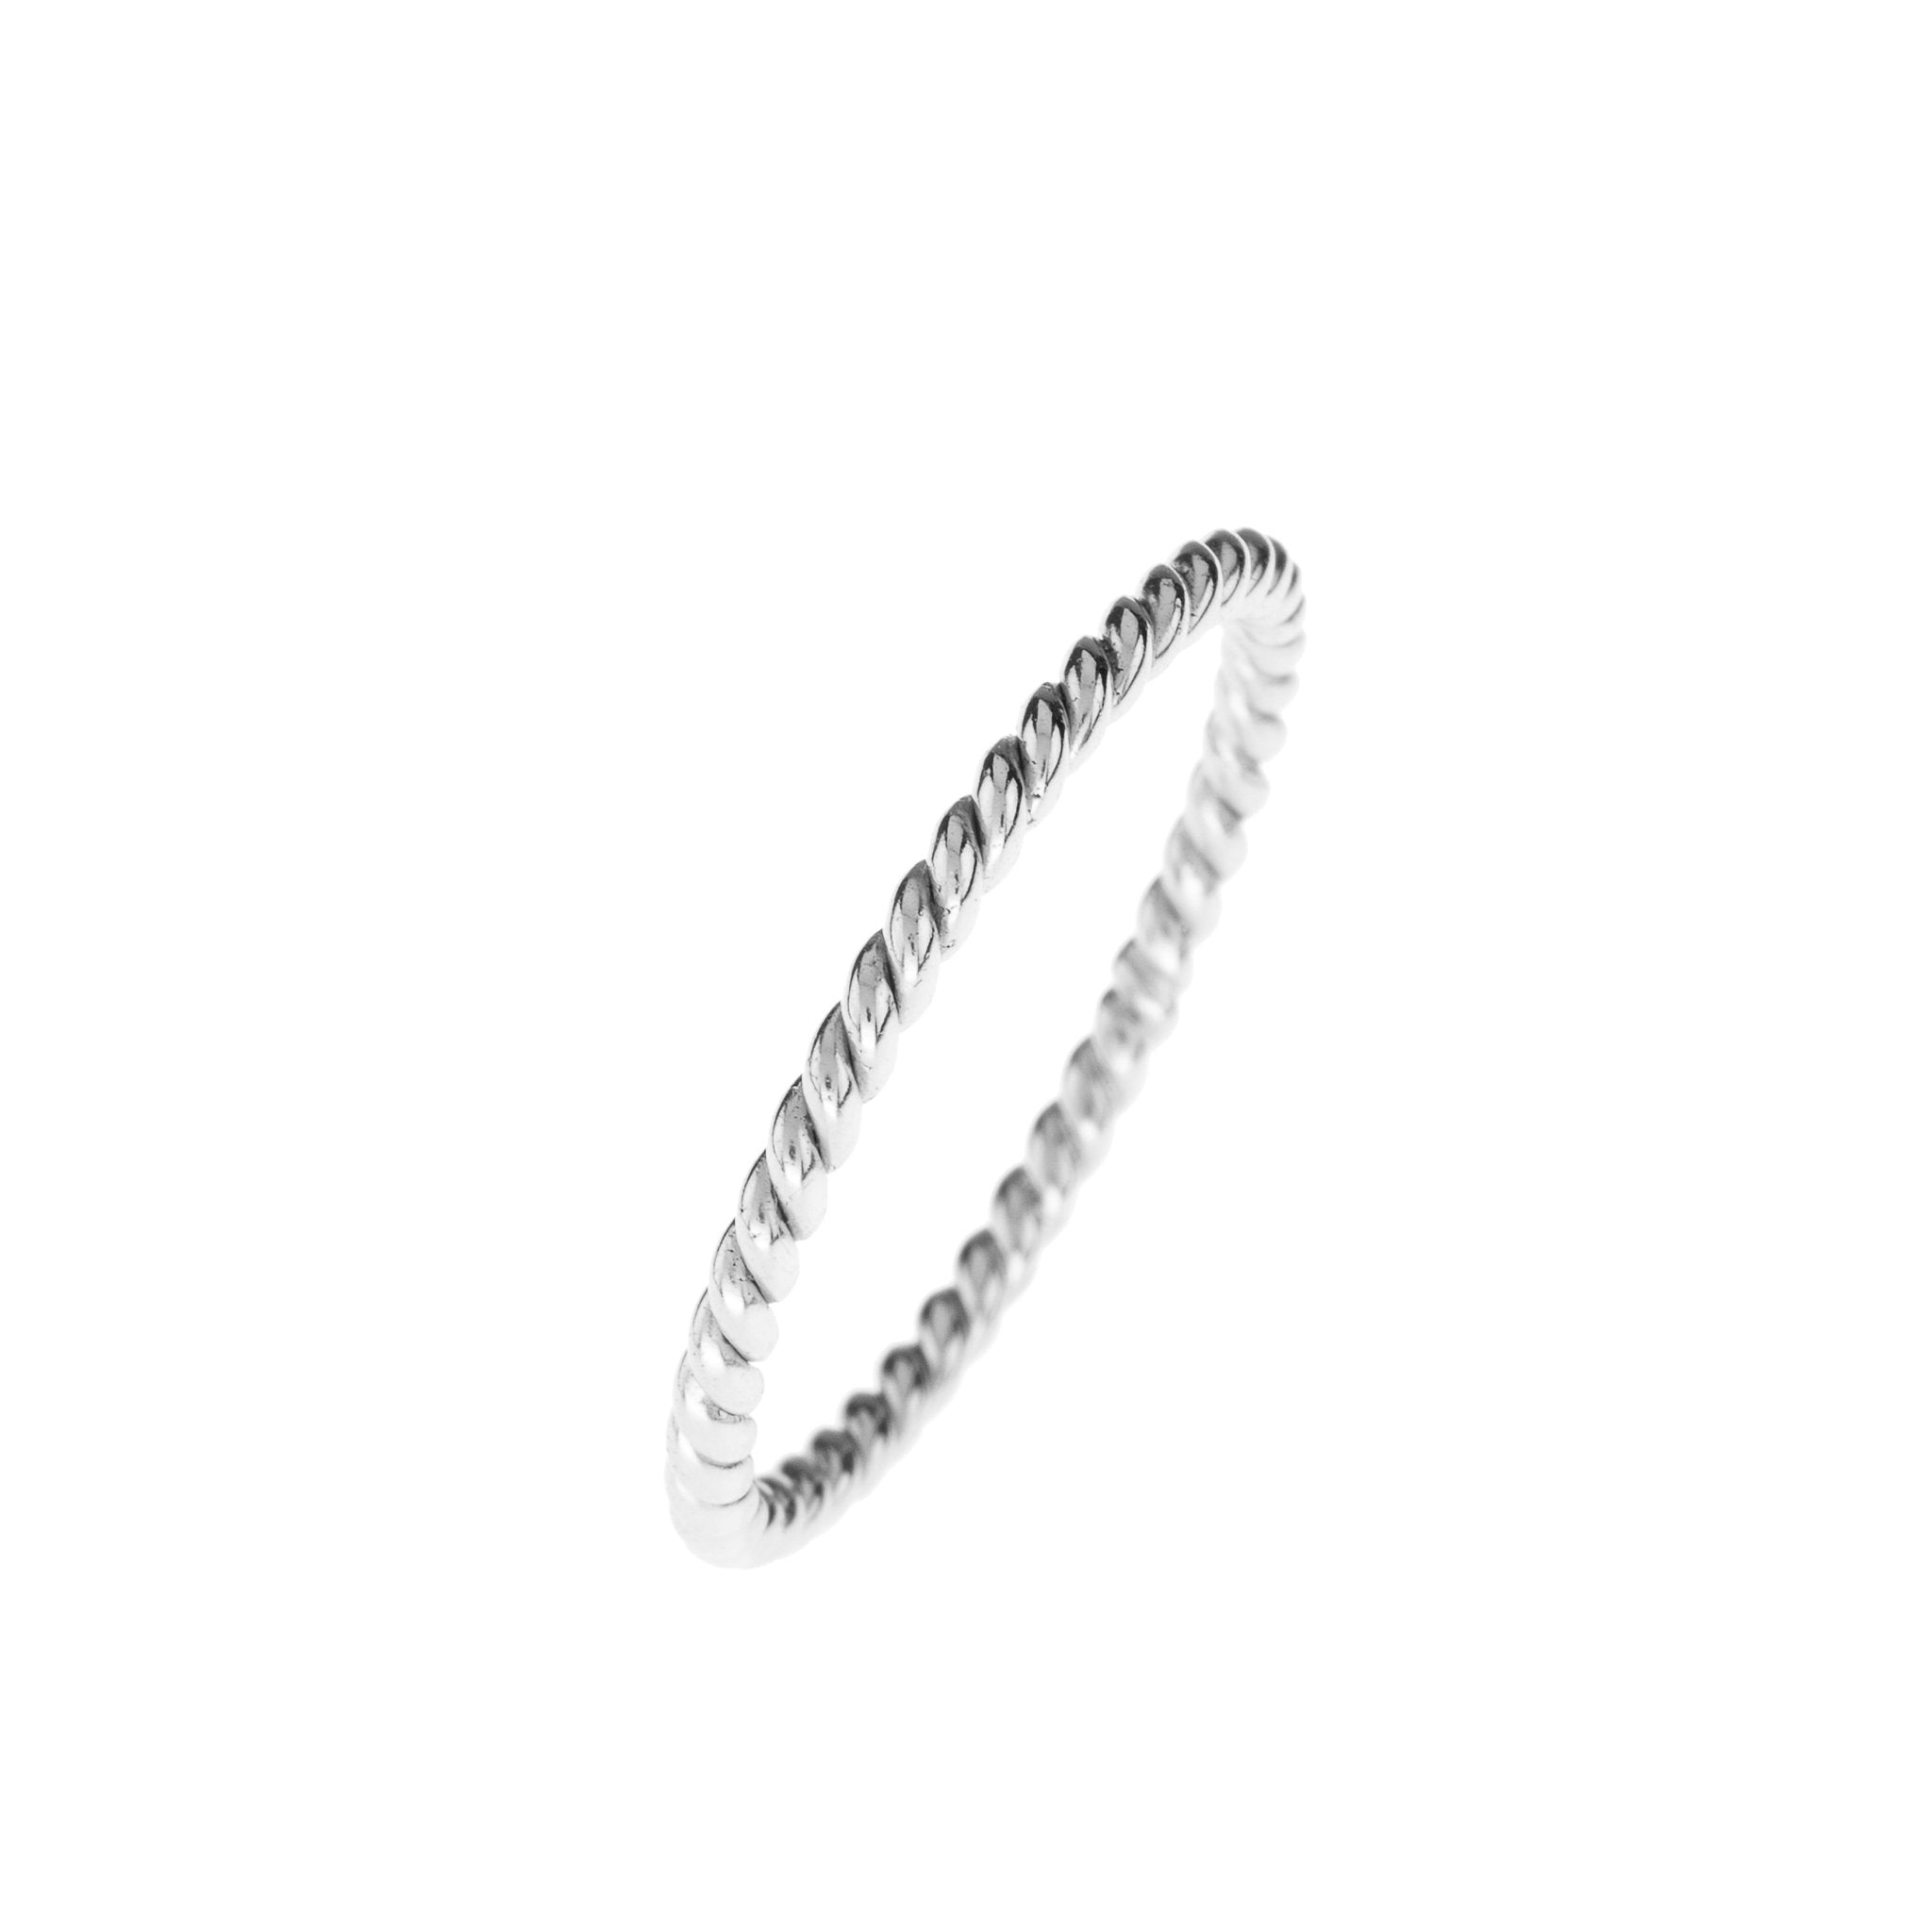 Sample Sale Twisted Flax Stacking Ring Silver Size P - LATELITA Rings